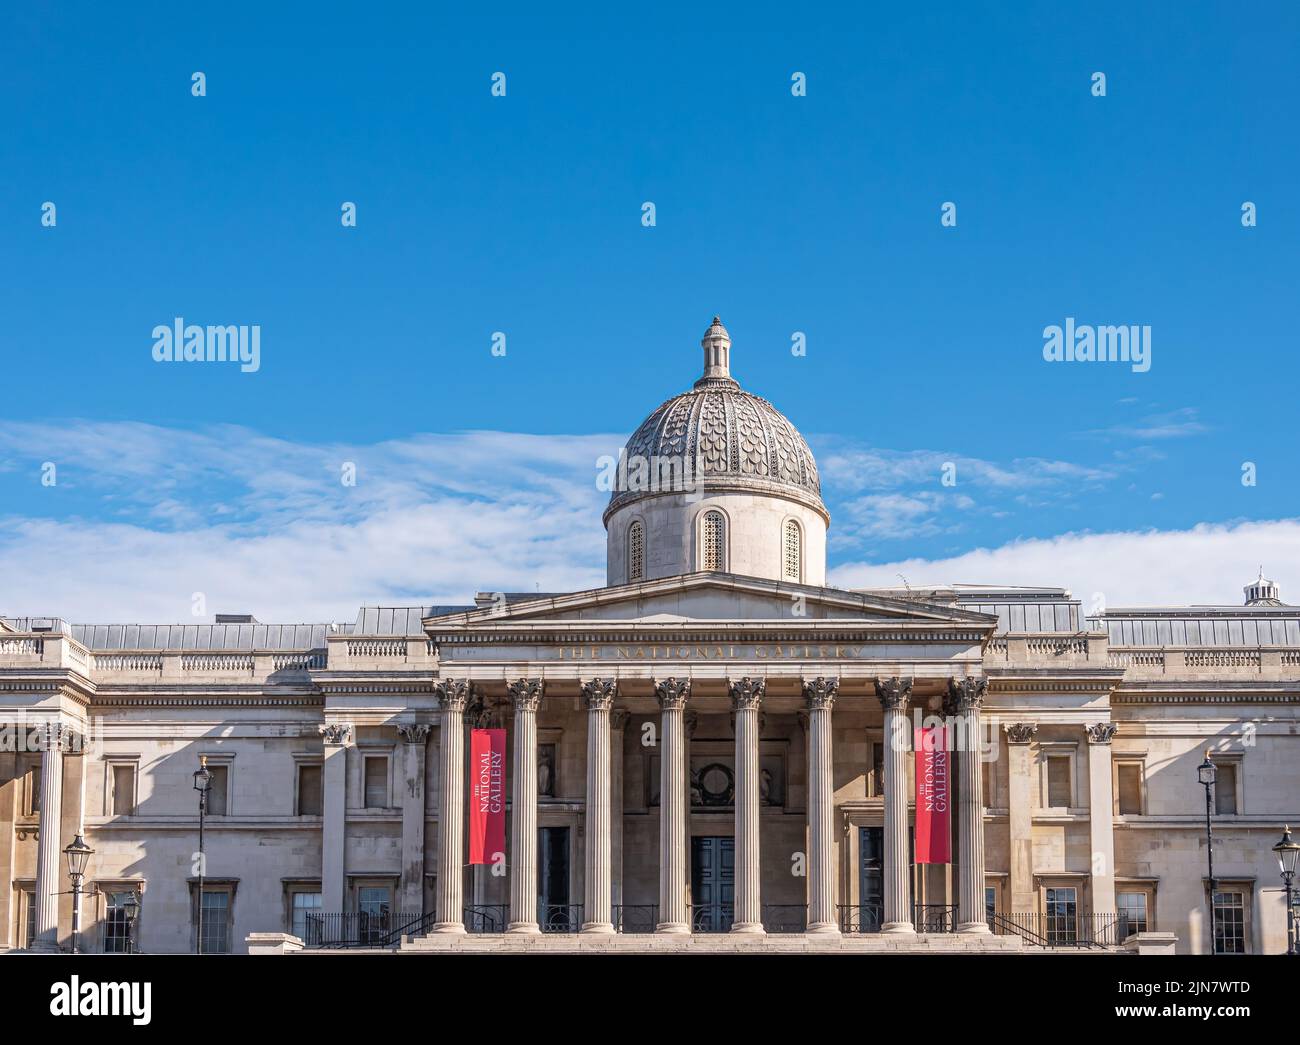 London, UK- July 4, 2022: Trafalgar Square. Central part with dome and pediment of National Gallery building under blue cloudscape. Red banners add co Stock Photo